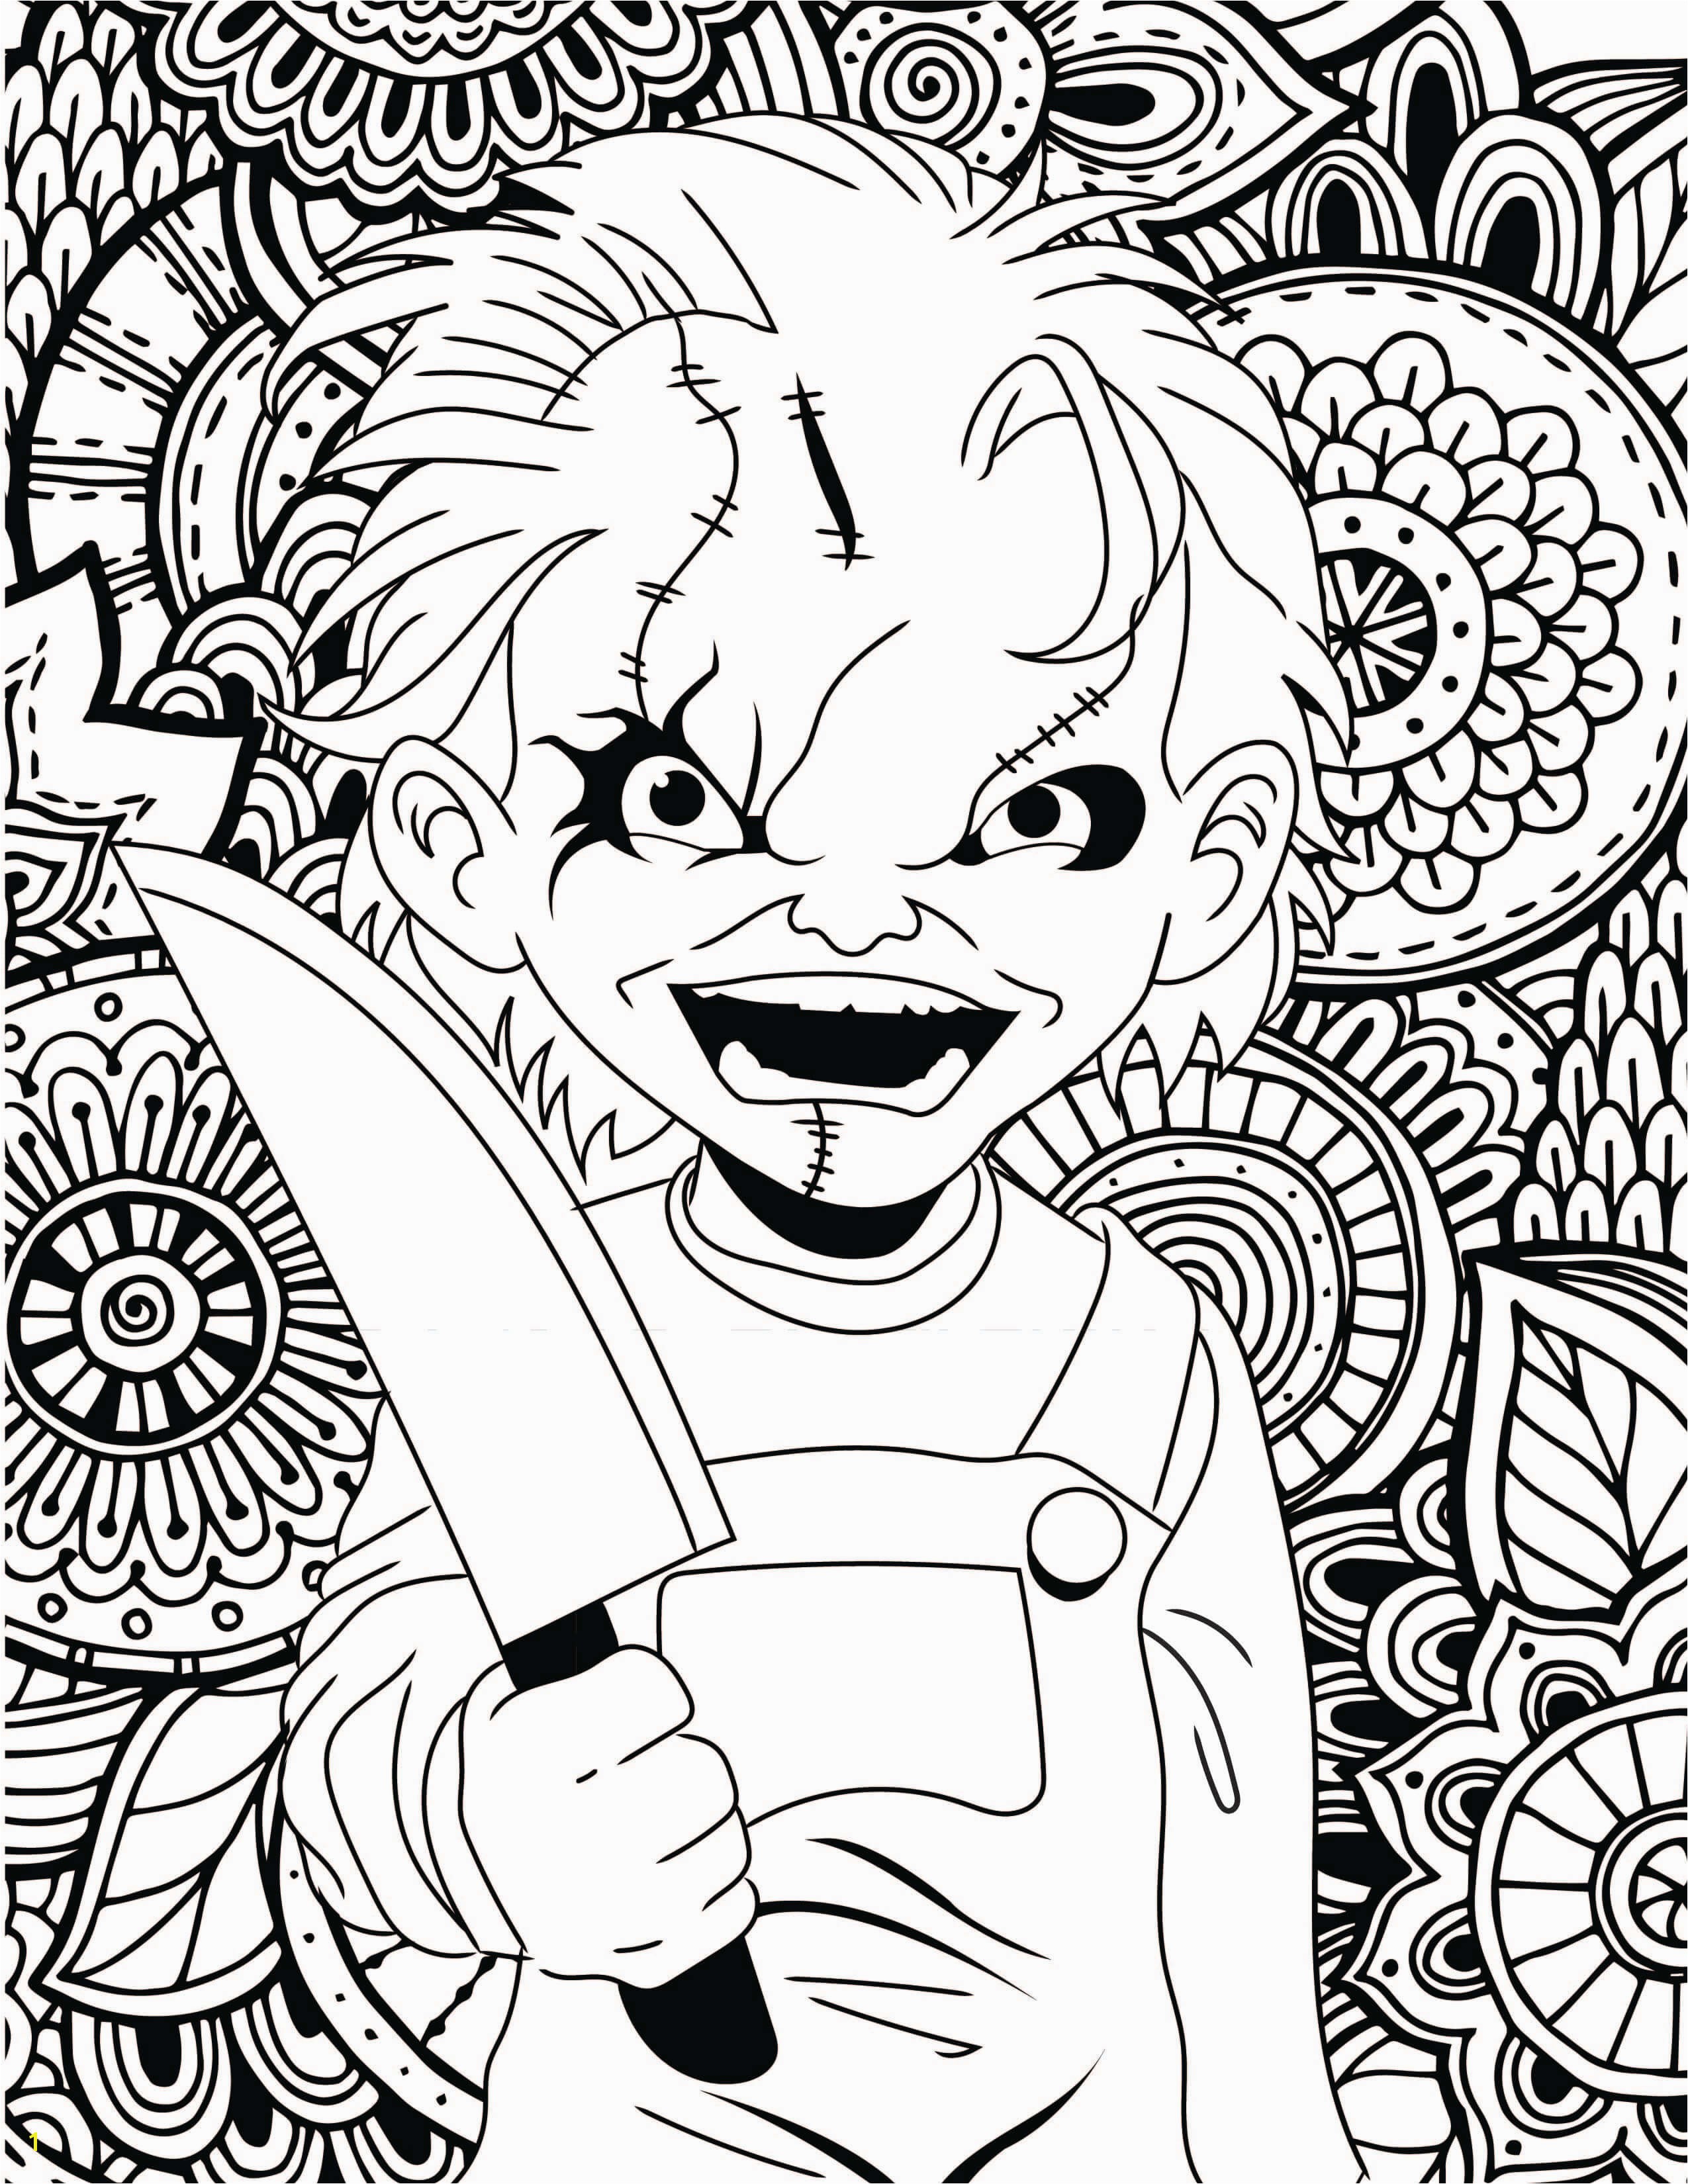 Creature From the Black Lagoon Coloring Pages 18best Horror Movie Coloring Book Clip Arts & Coloring Pages